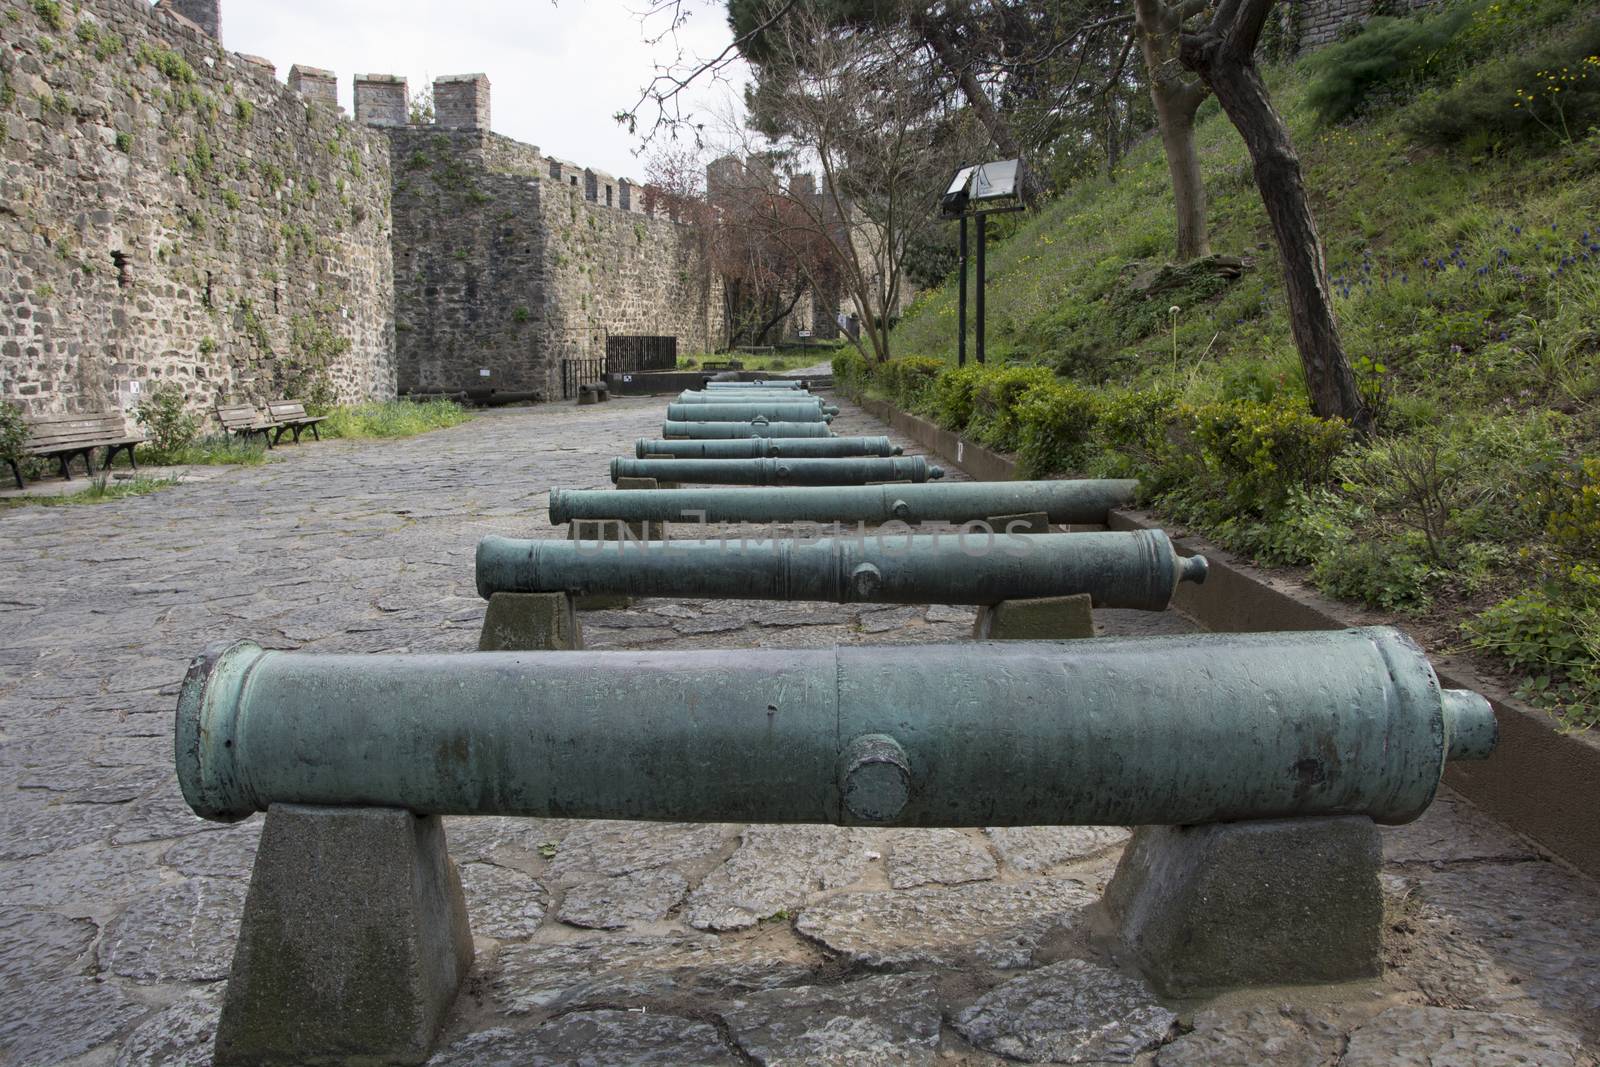 historical ottoman cannon. Used at the conquest of istanbul